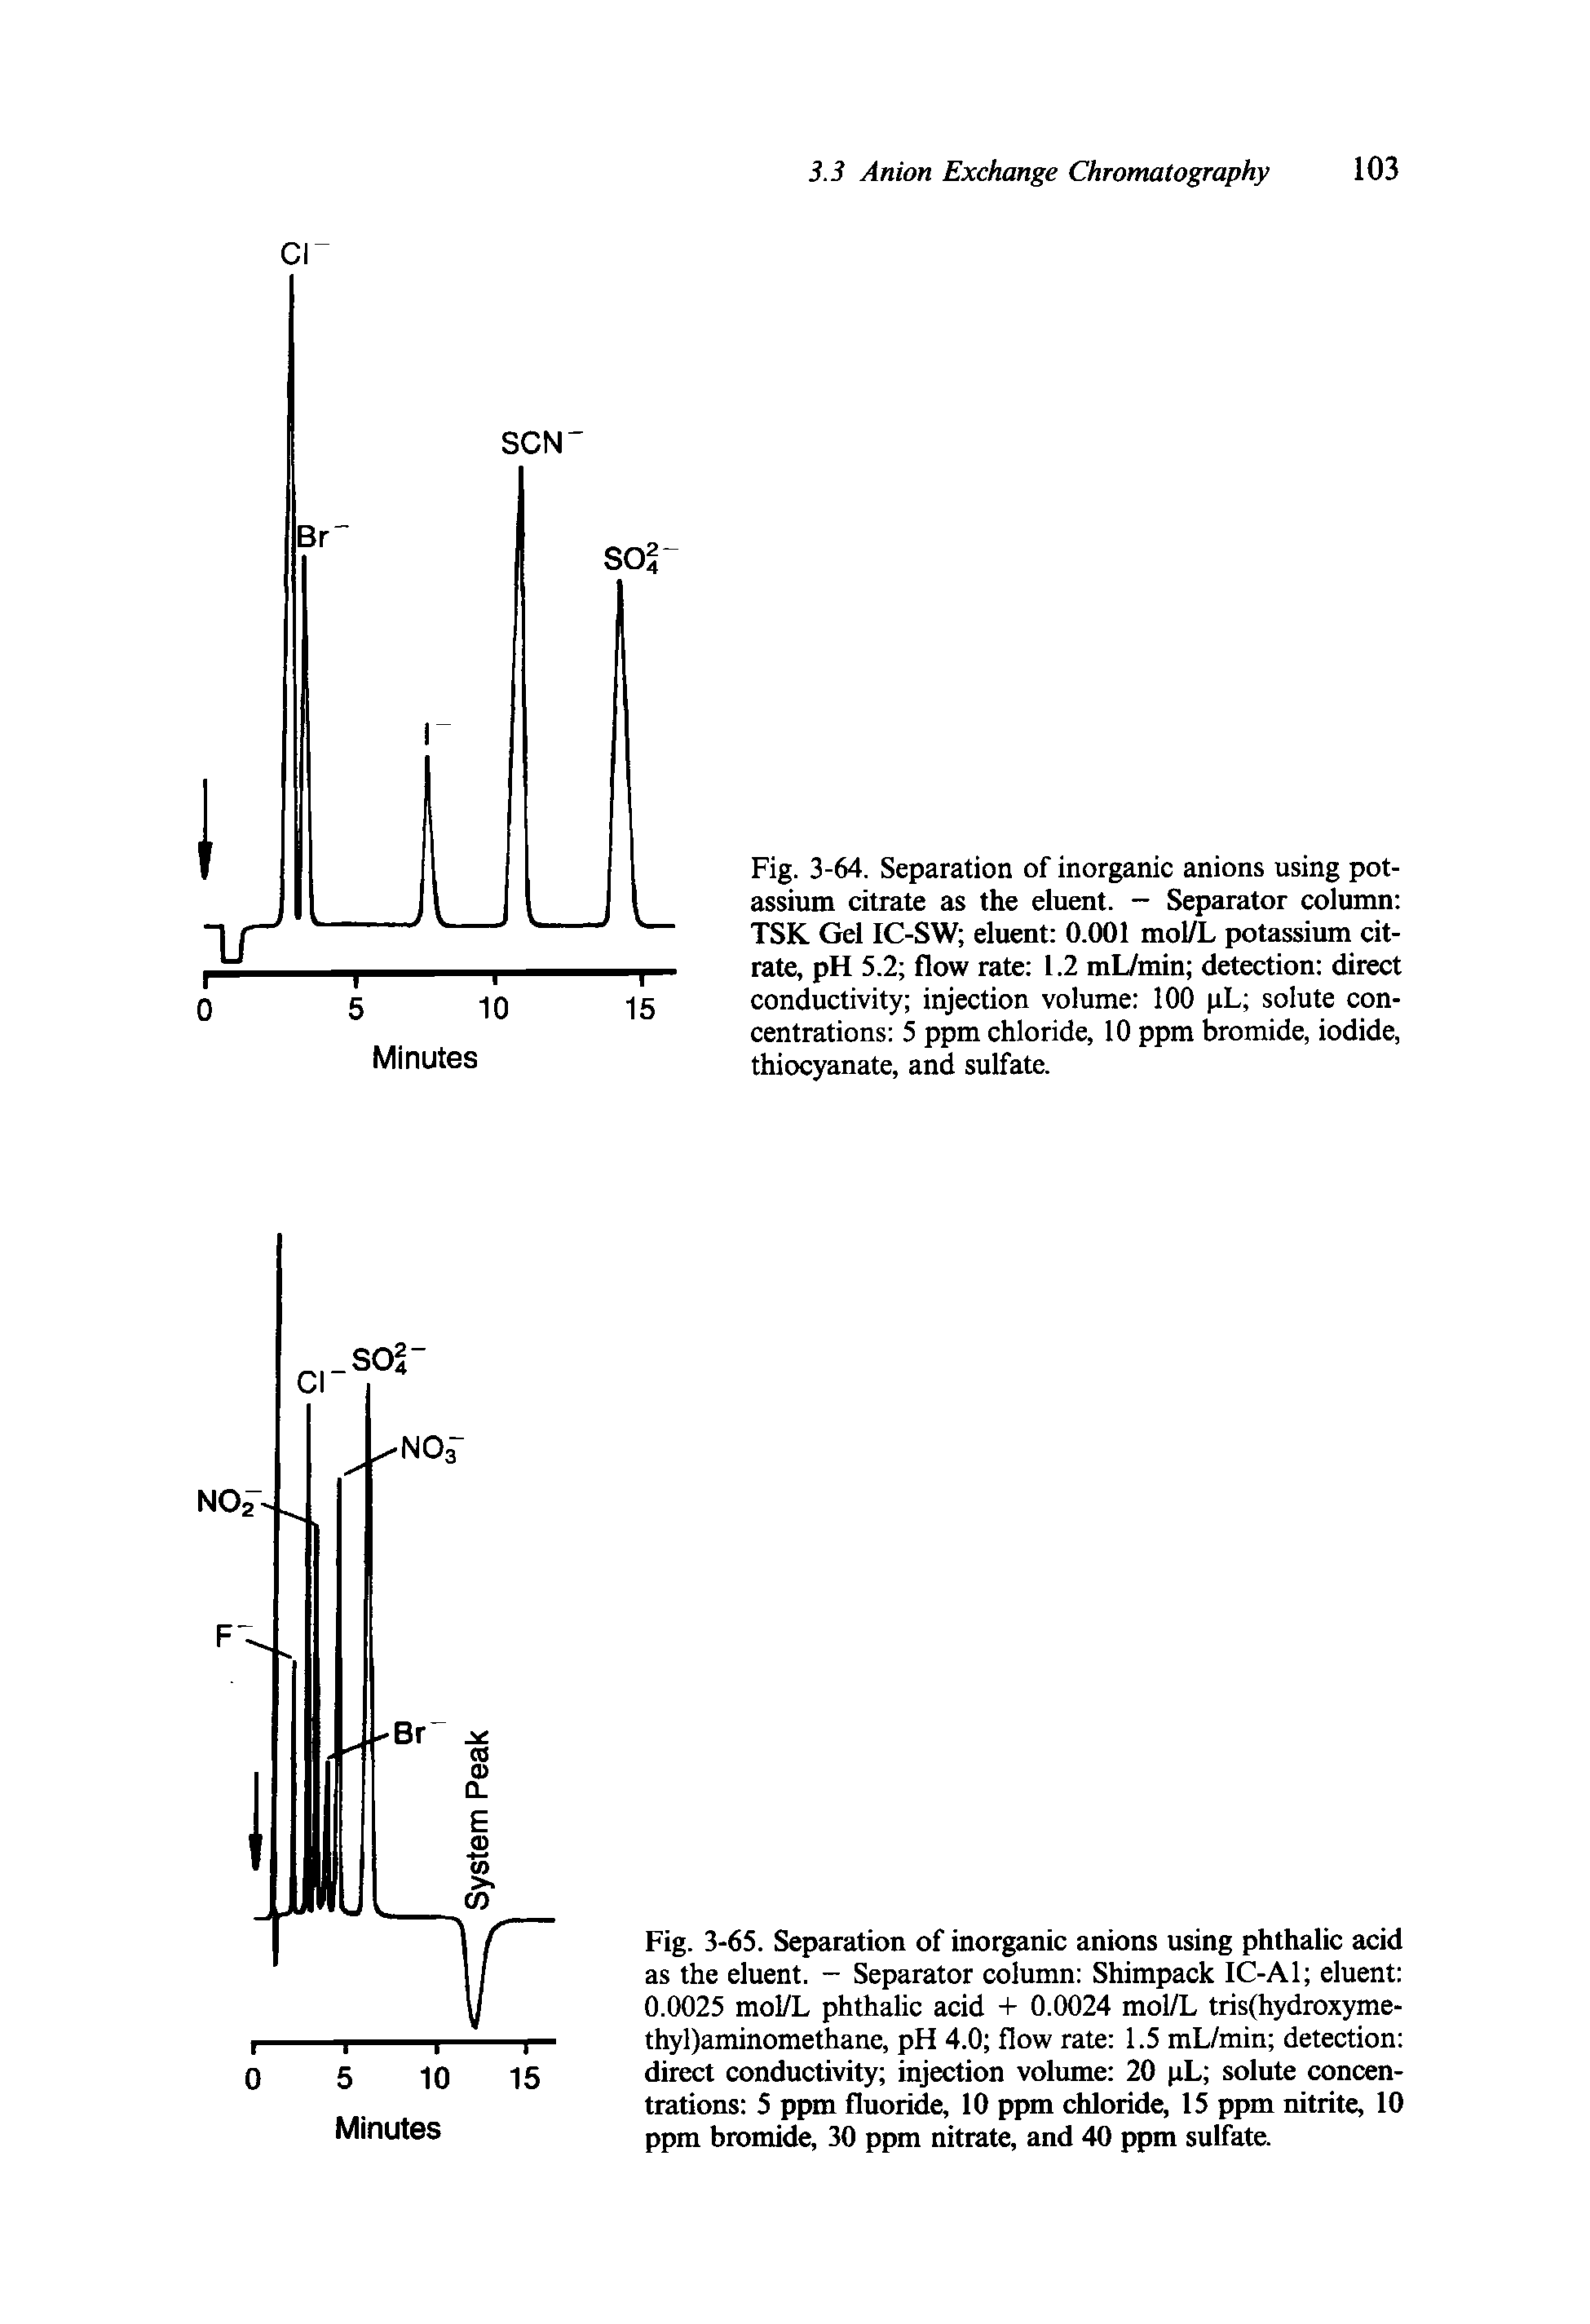 Fig. 3-64. Separation of inorganic anions using potassium citrate as the eluent. - Separator column TSK Gel IC-SW eluent 0.001 mol/L potassium citrate, pH 5.2 flow rate 1.2 mL/min detection direct conductivity injection volume 100 pL solute concentrations 5 ppm chloride, 10 ppm bromide, iodide, thiocyanate, and sulfate.